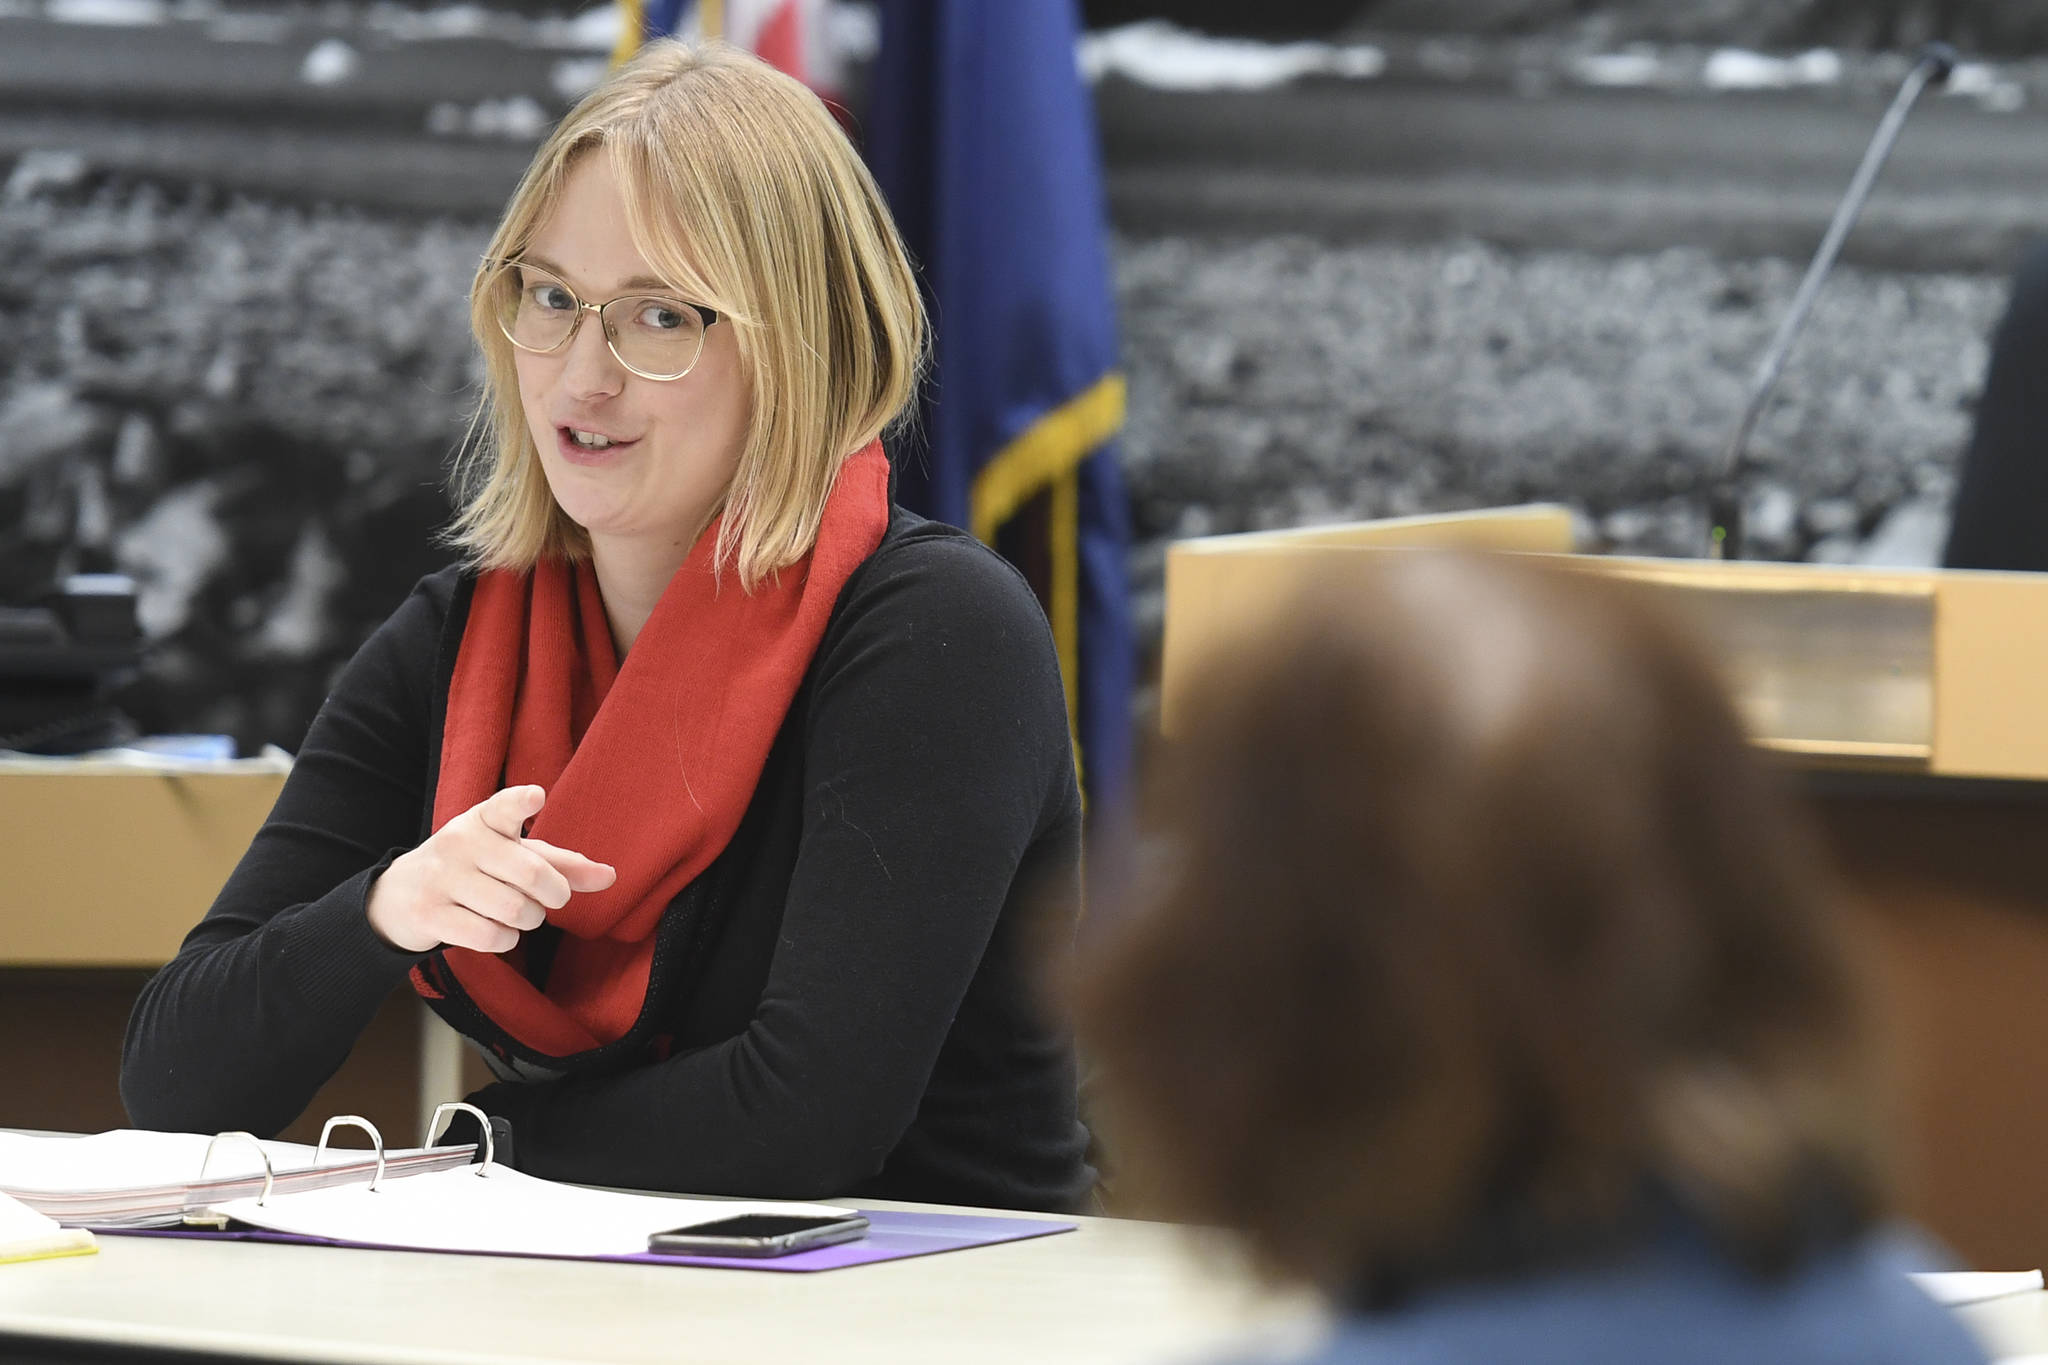 Assemblymember Carole Triem chairs the Visitor Industry Task Force meeting in the Assembly chambers on Tuesday, Jan. 7, 2020. (Michael Penn | Juneau Empire)